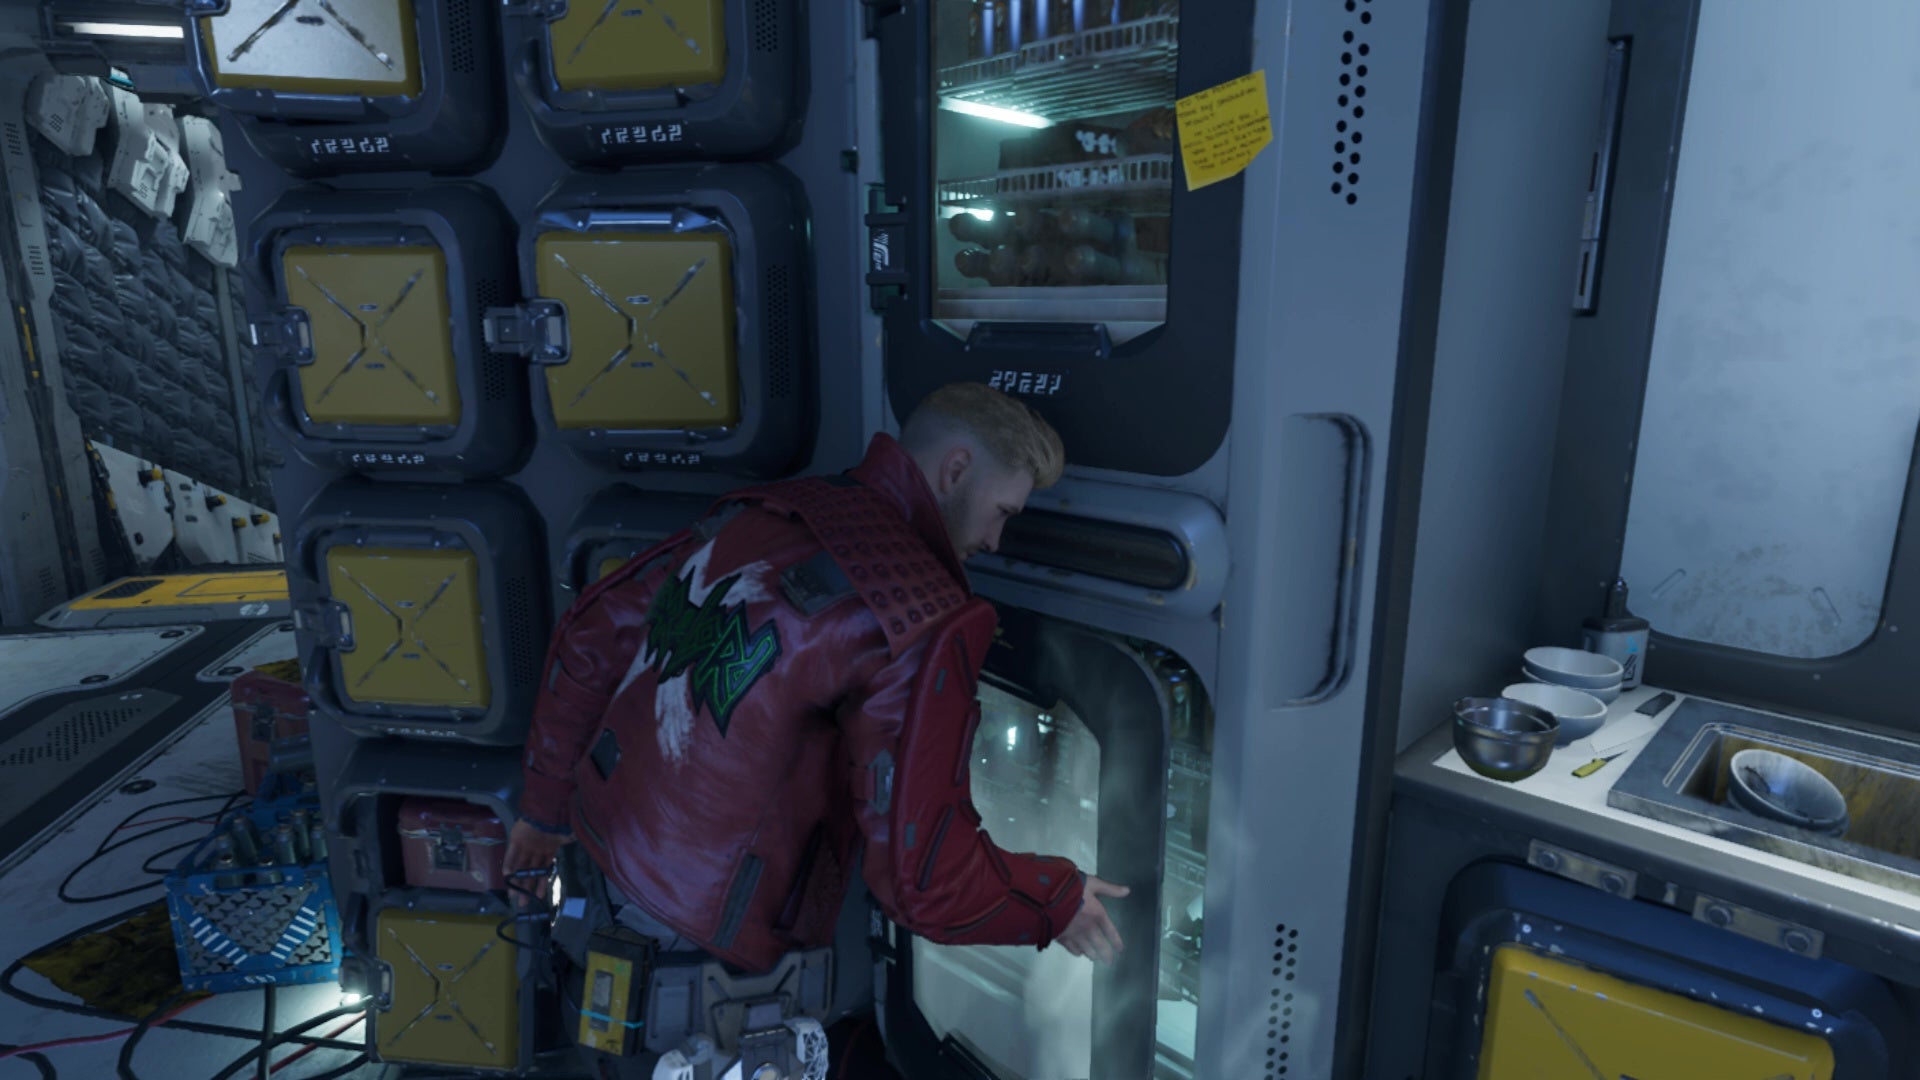 Peter Quill closes the fridge door in Marvel's Guardians Of The Galaxy.